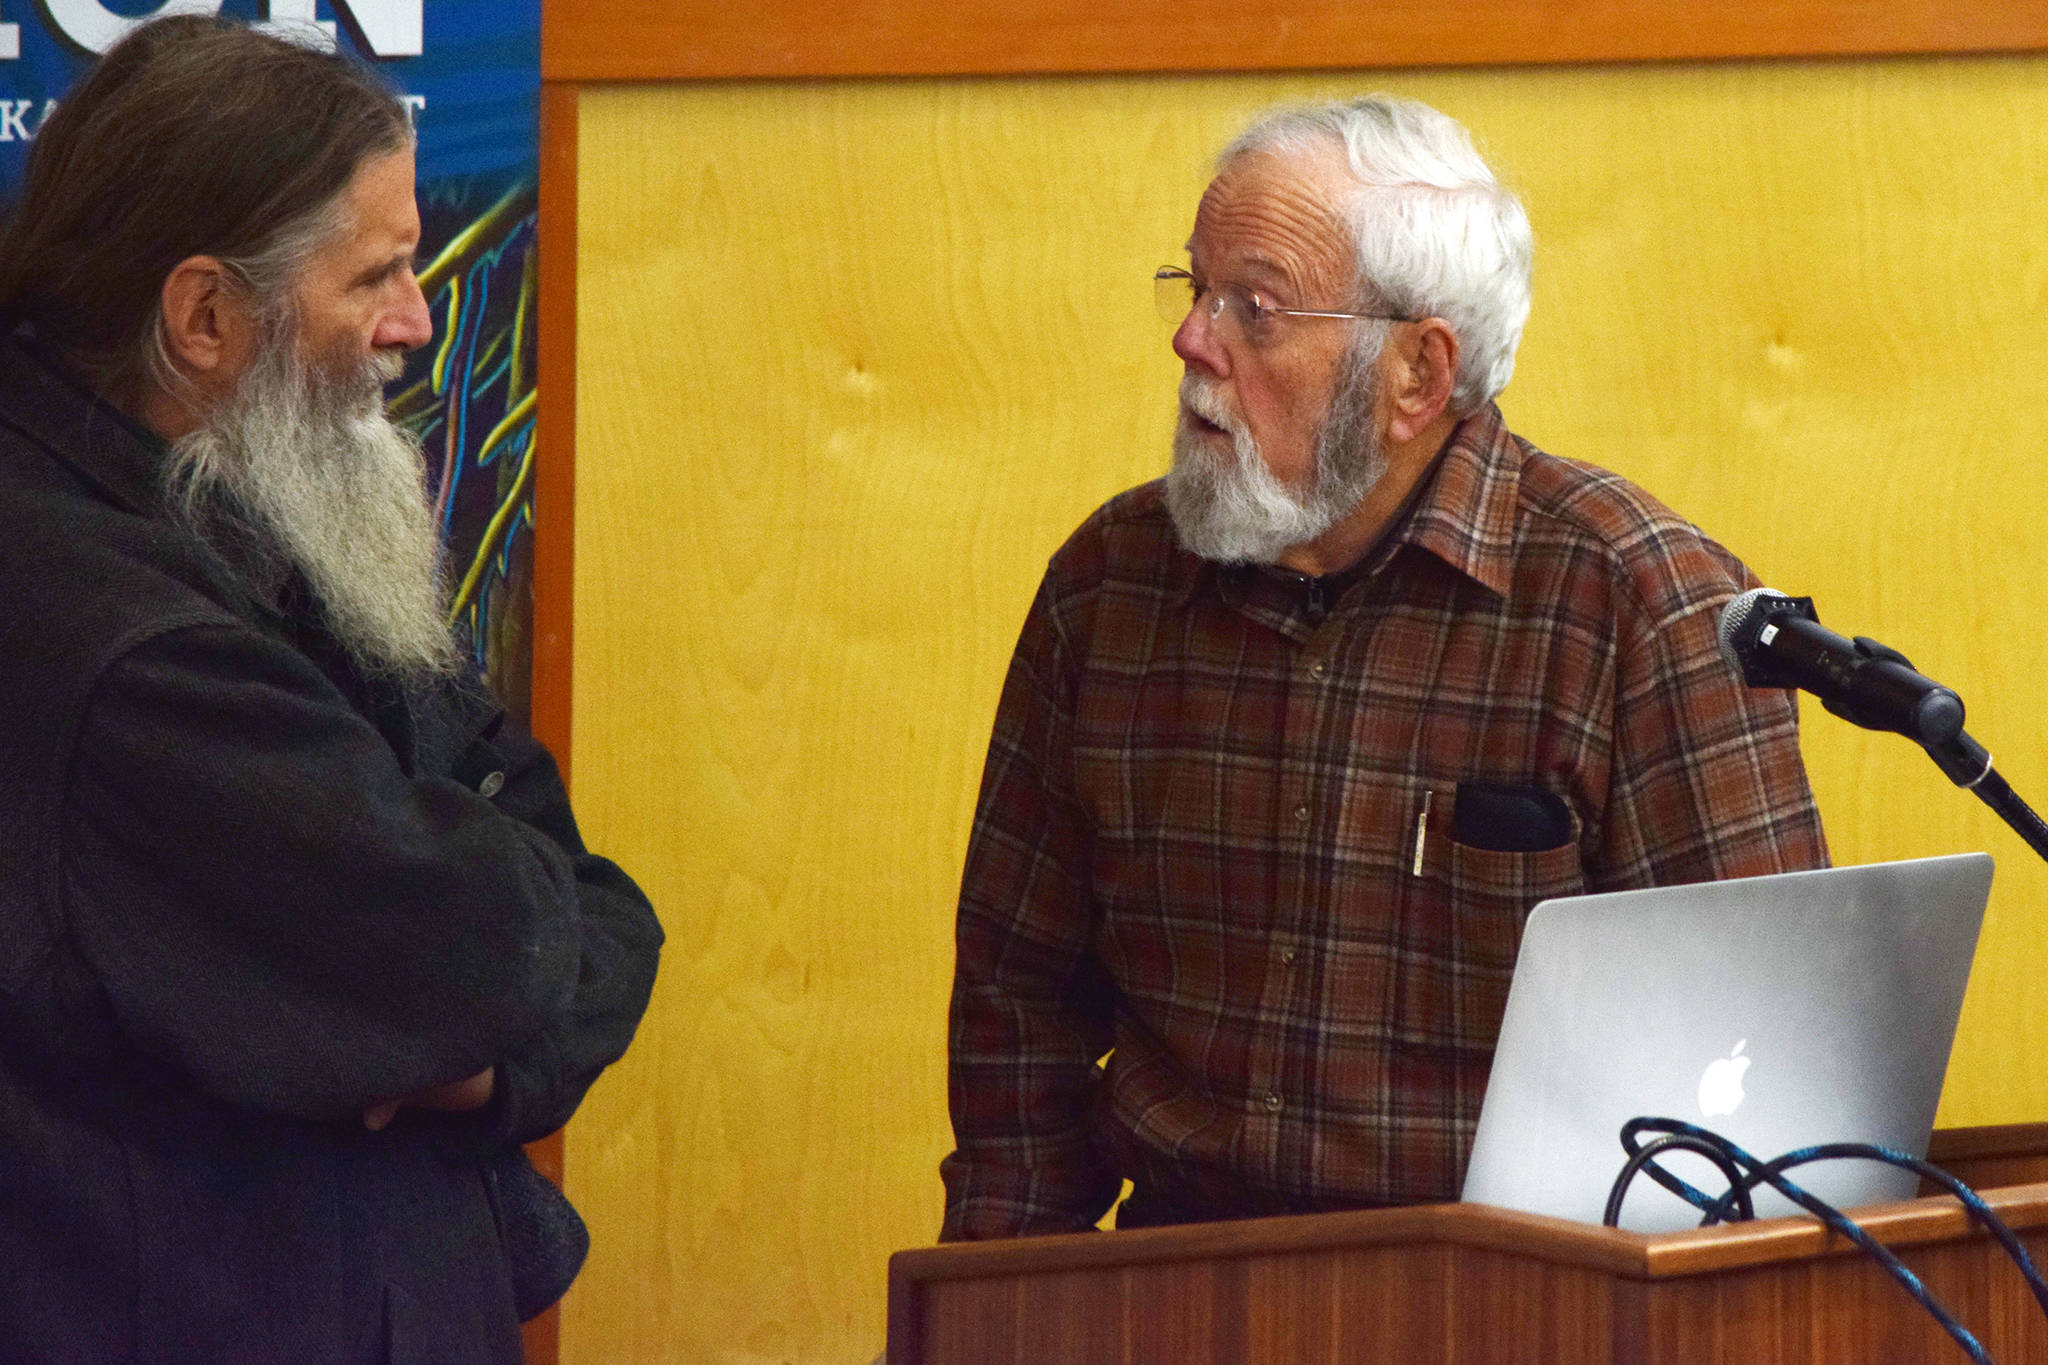 Dr. Winston Smith, research scientist at the University of Alaska Institute of Arctic Biology, speaks with a guest after his lecture on goshawk breeding season ecology at the University of Alaska Southeast on Friday, Oct. 11, 2019. (Nolin Ainsworth | Juneau Empire)